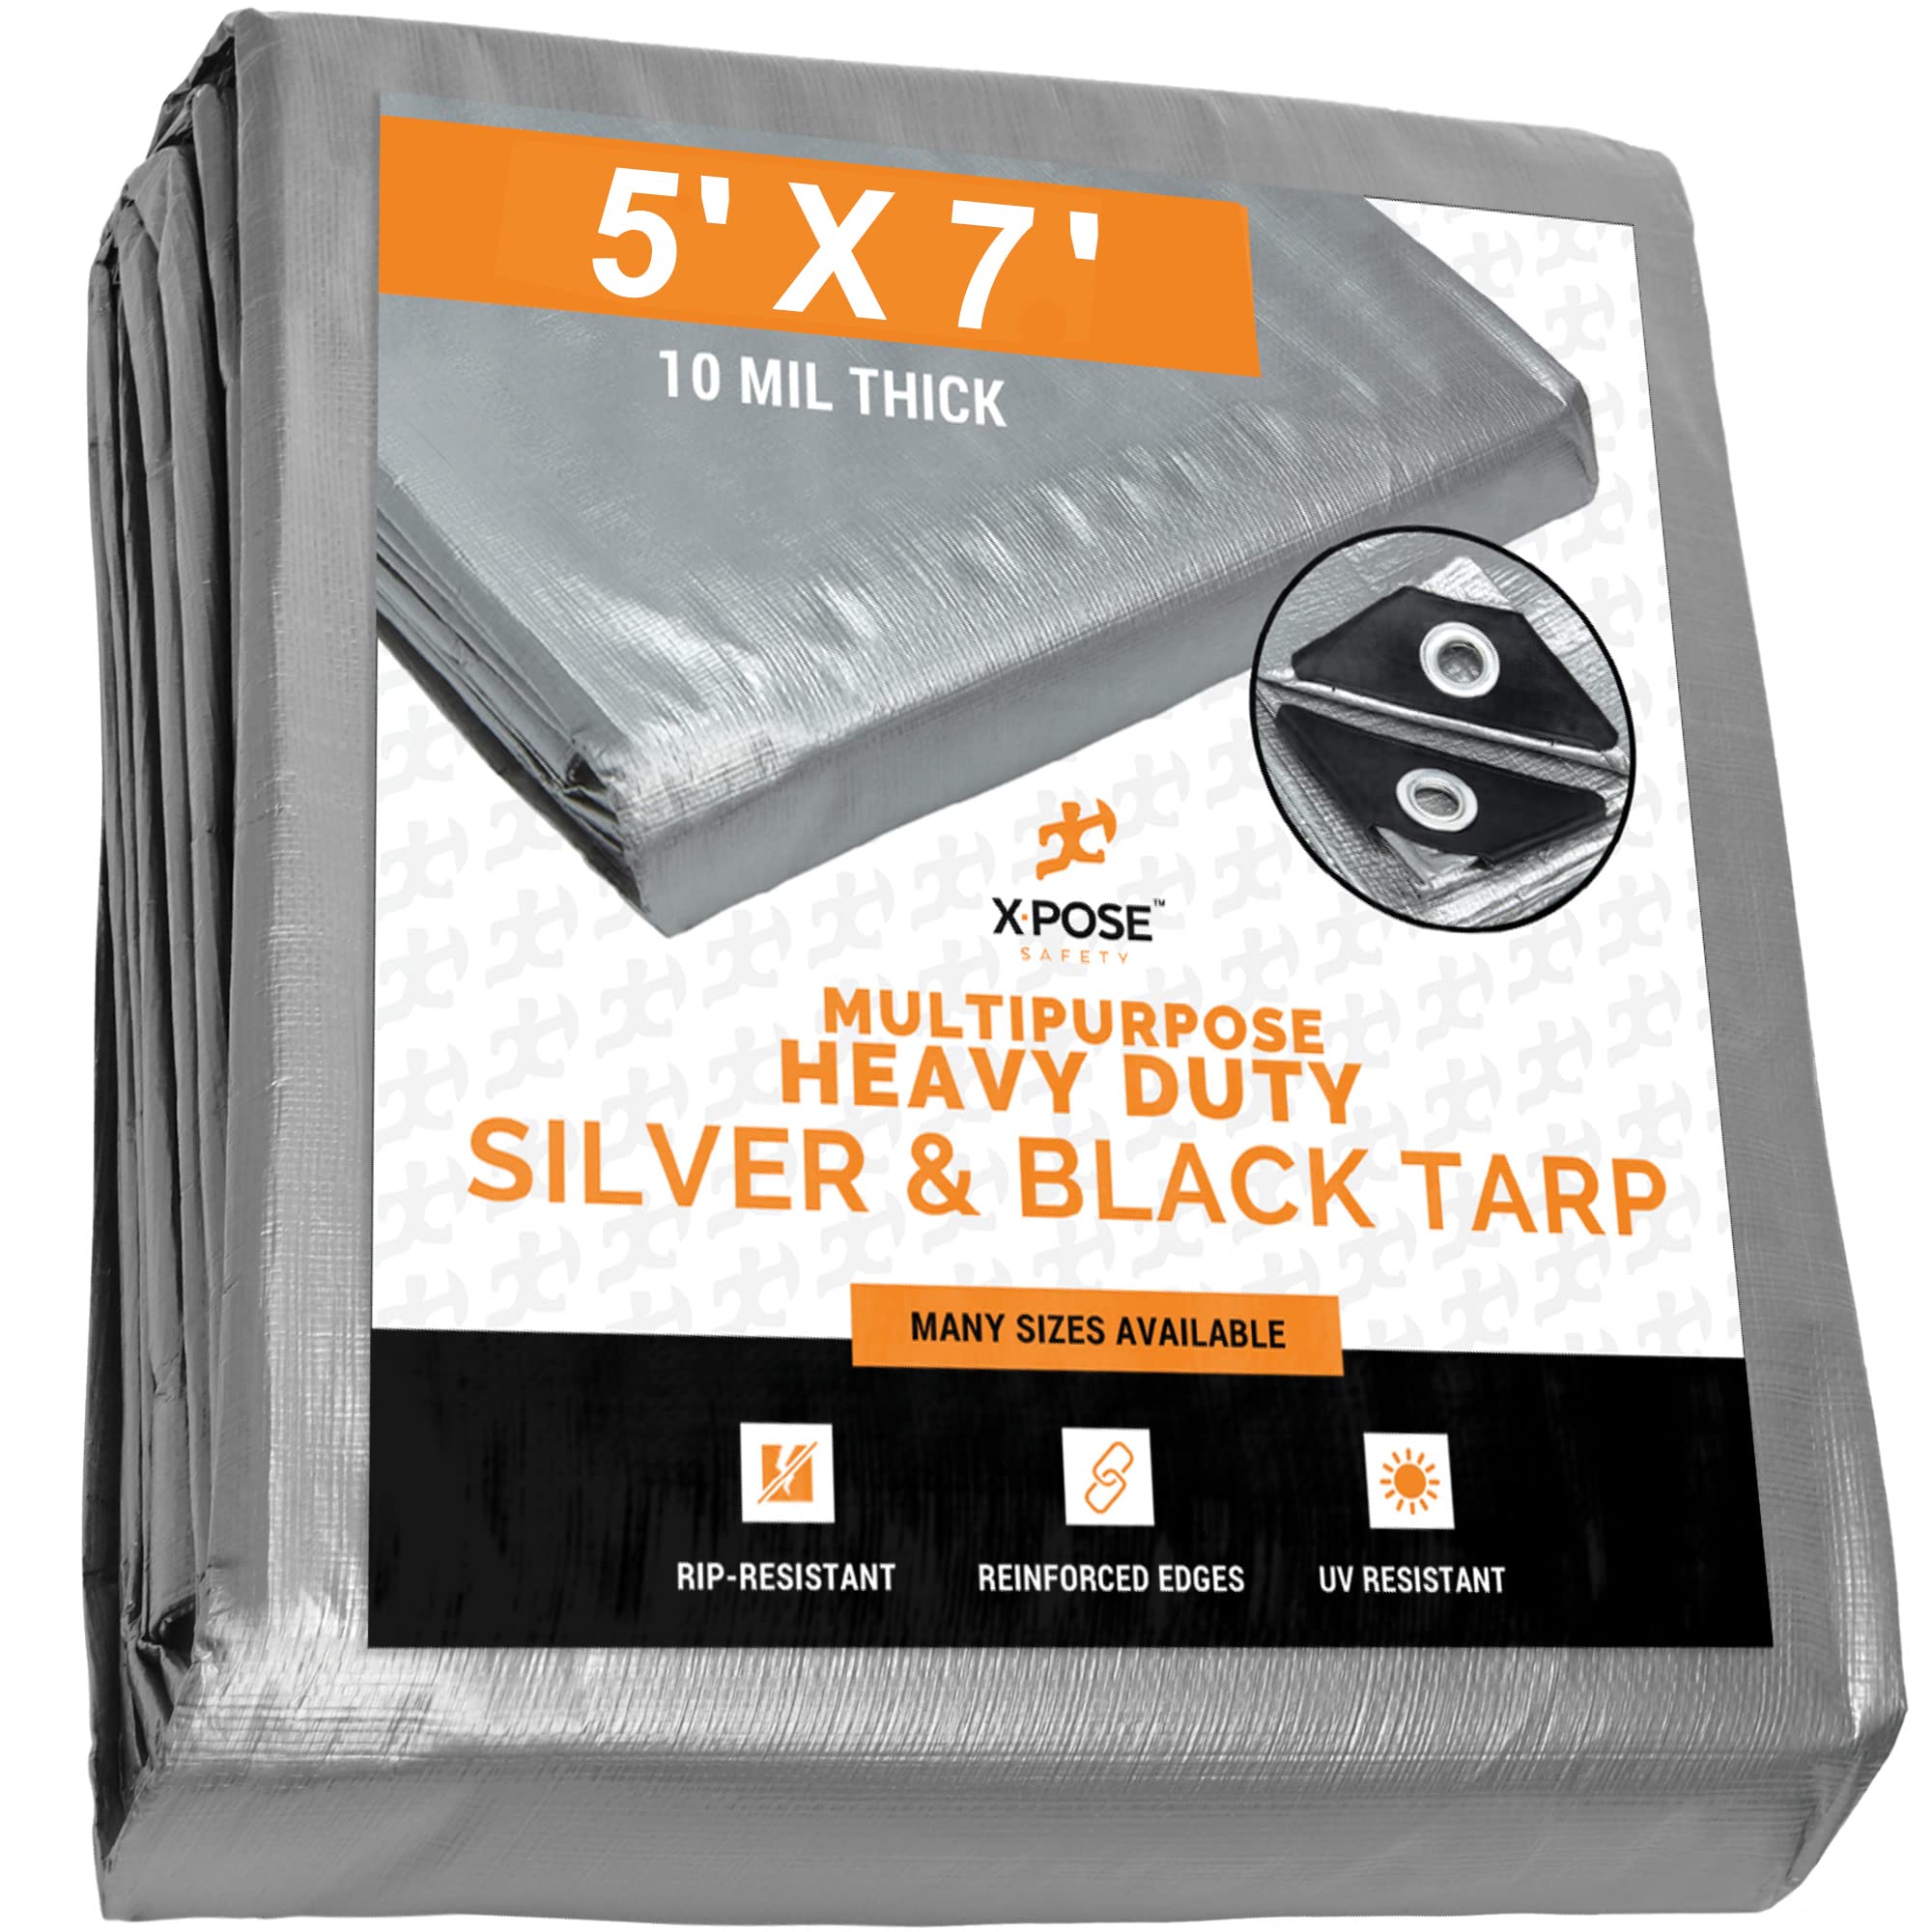 Xpose Safety Heavy Duty Poly Tarp - 10 Mil Thick Waterproof, UV Blocking Protective Cover - Reversible Silver and Black - Laminated Coating - Rustproof Grommets - by 